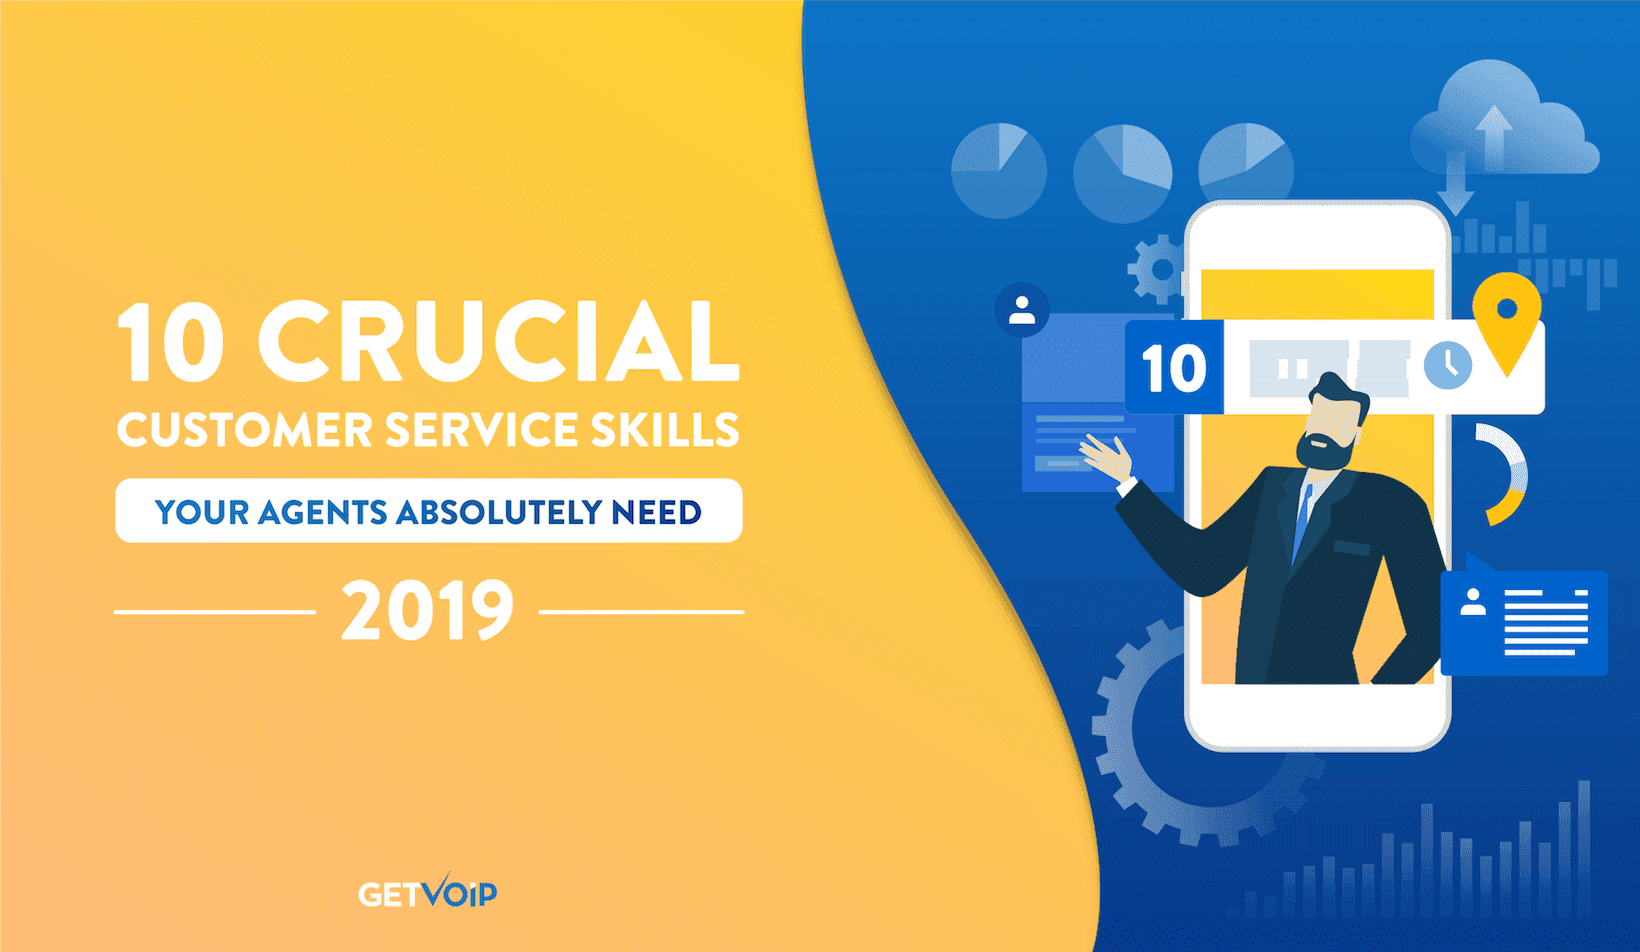 10 Crucial Customer Service Skills Your Agents Absolutely Need in 2019